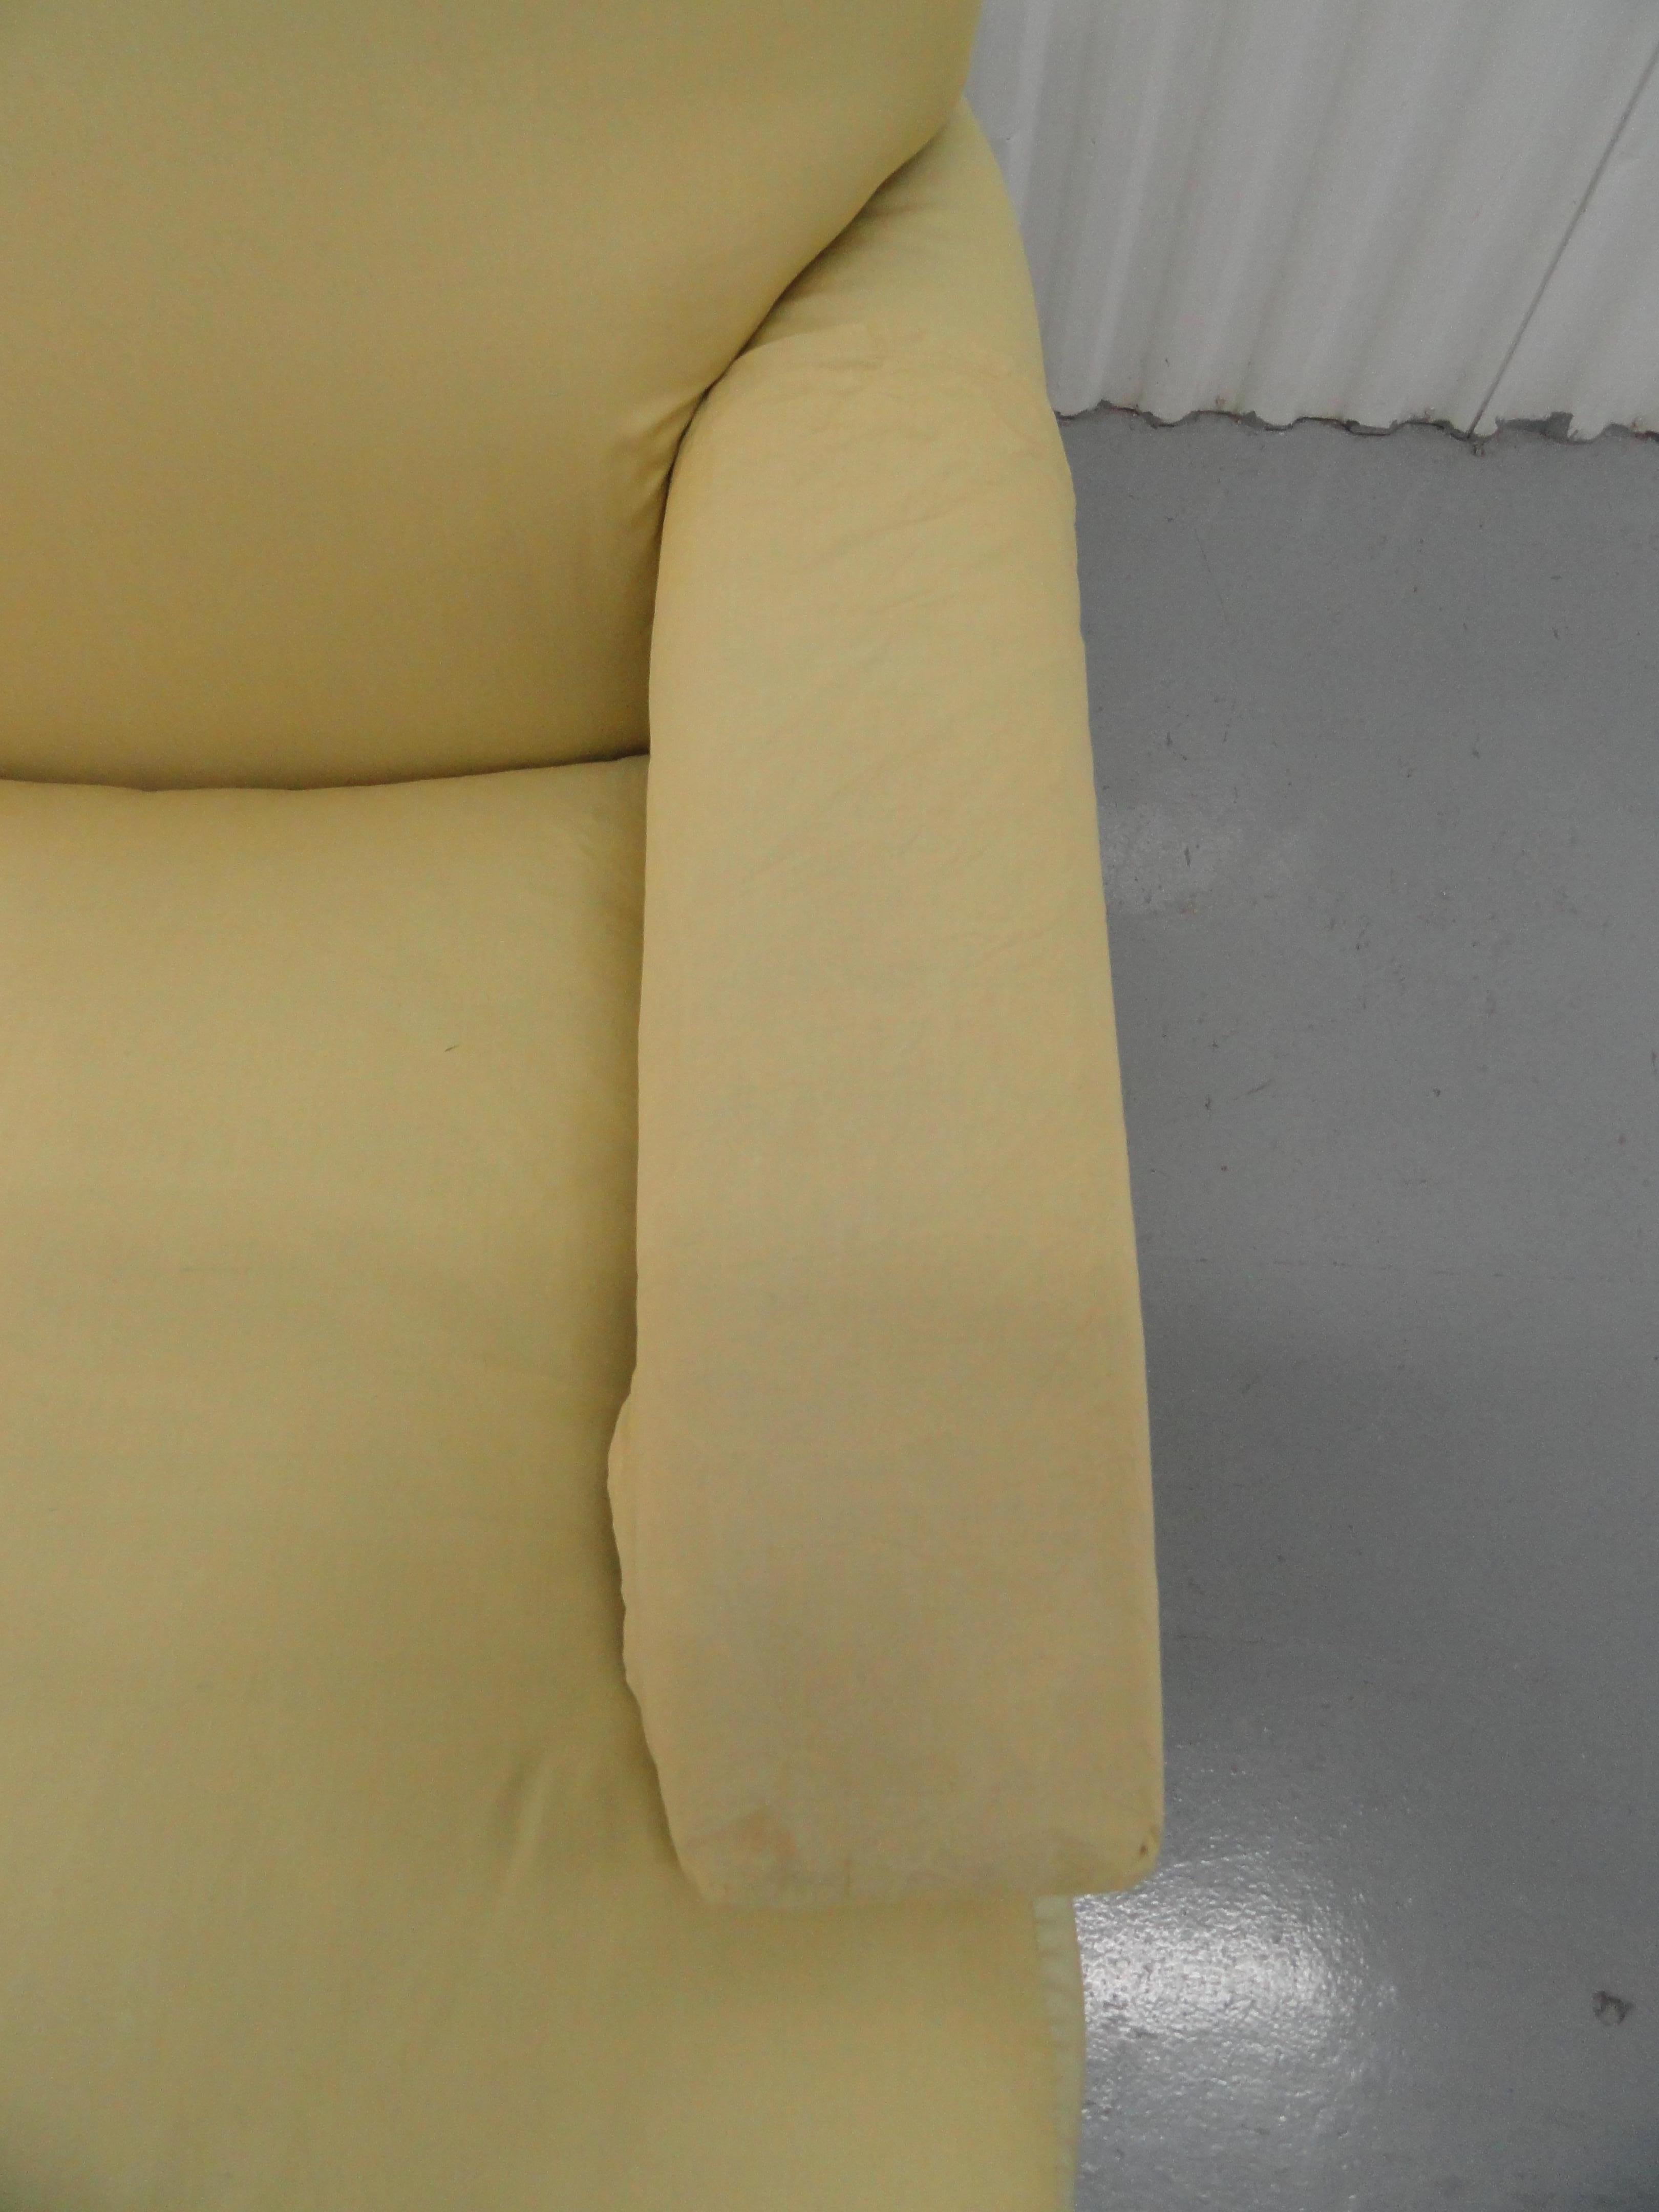 Classic Upholstered Club Chair For Sale 4